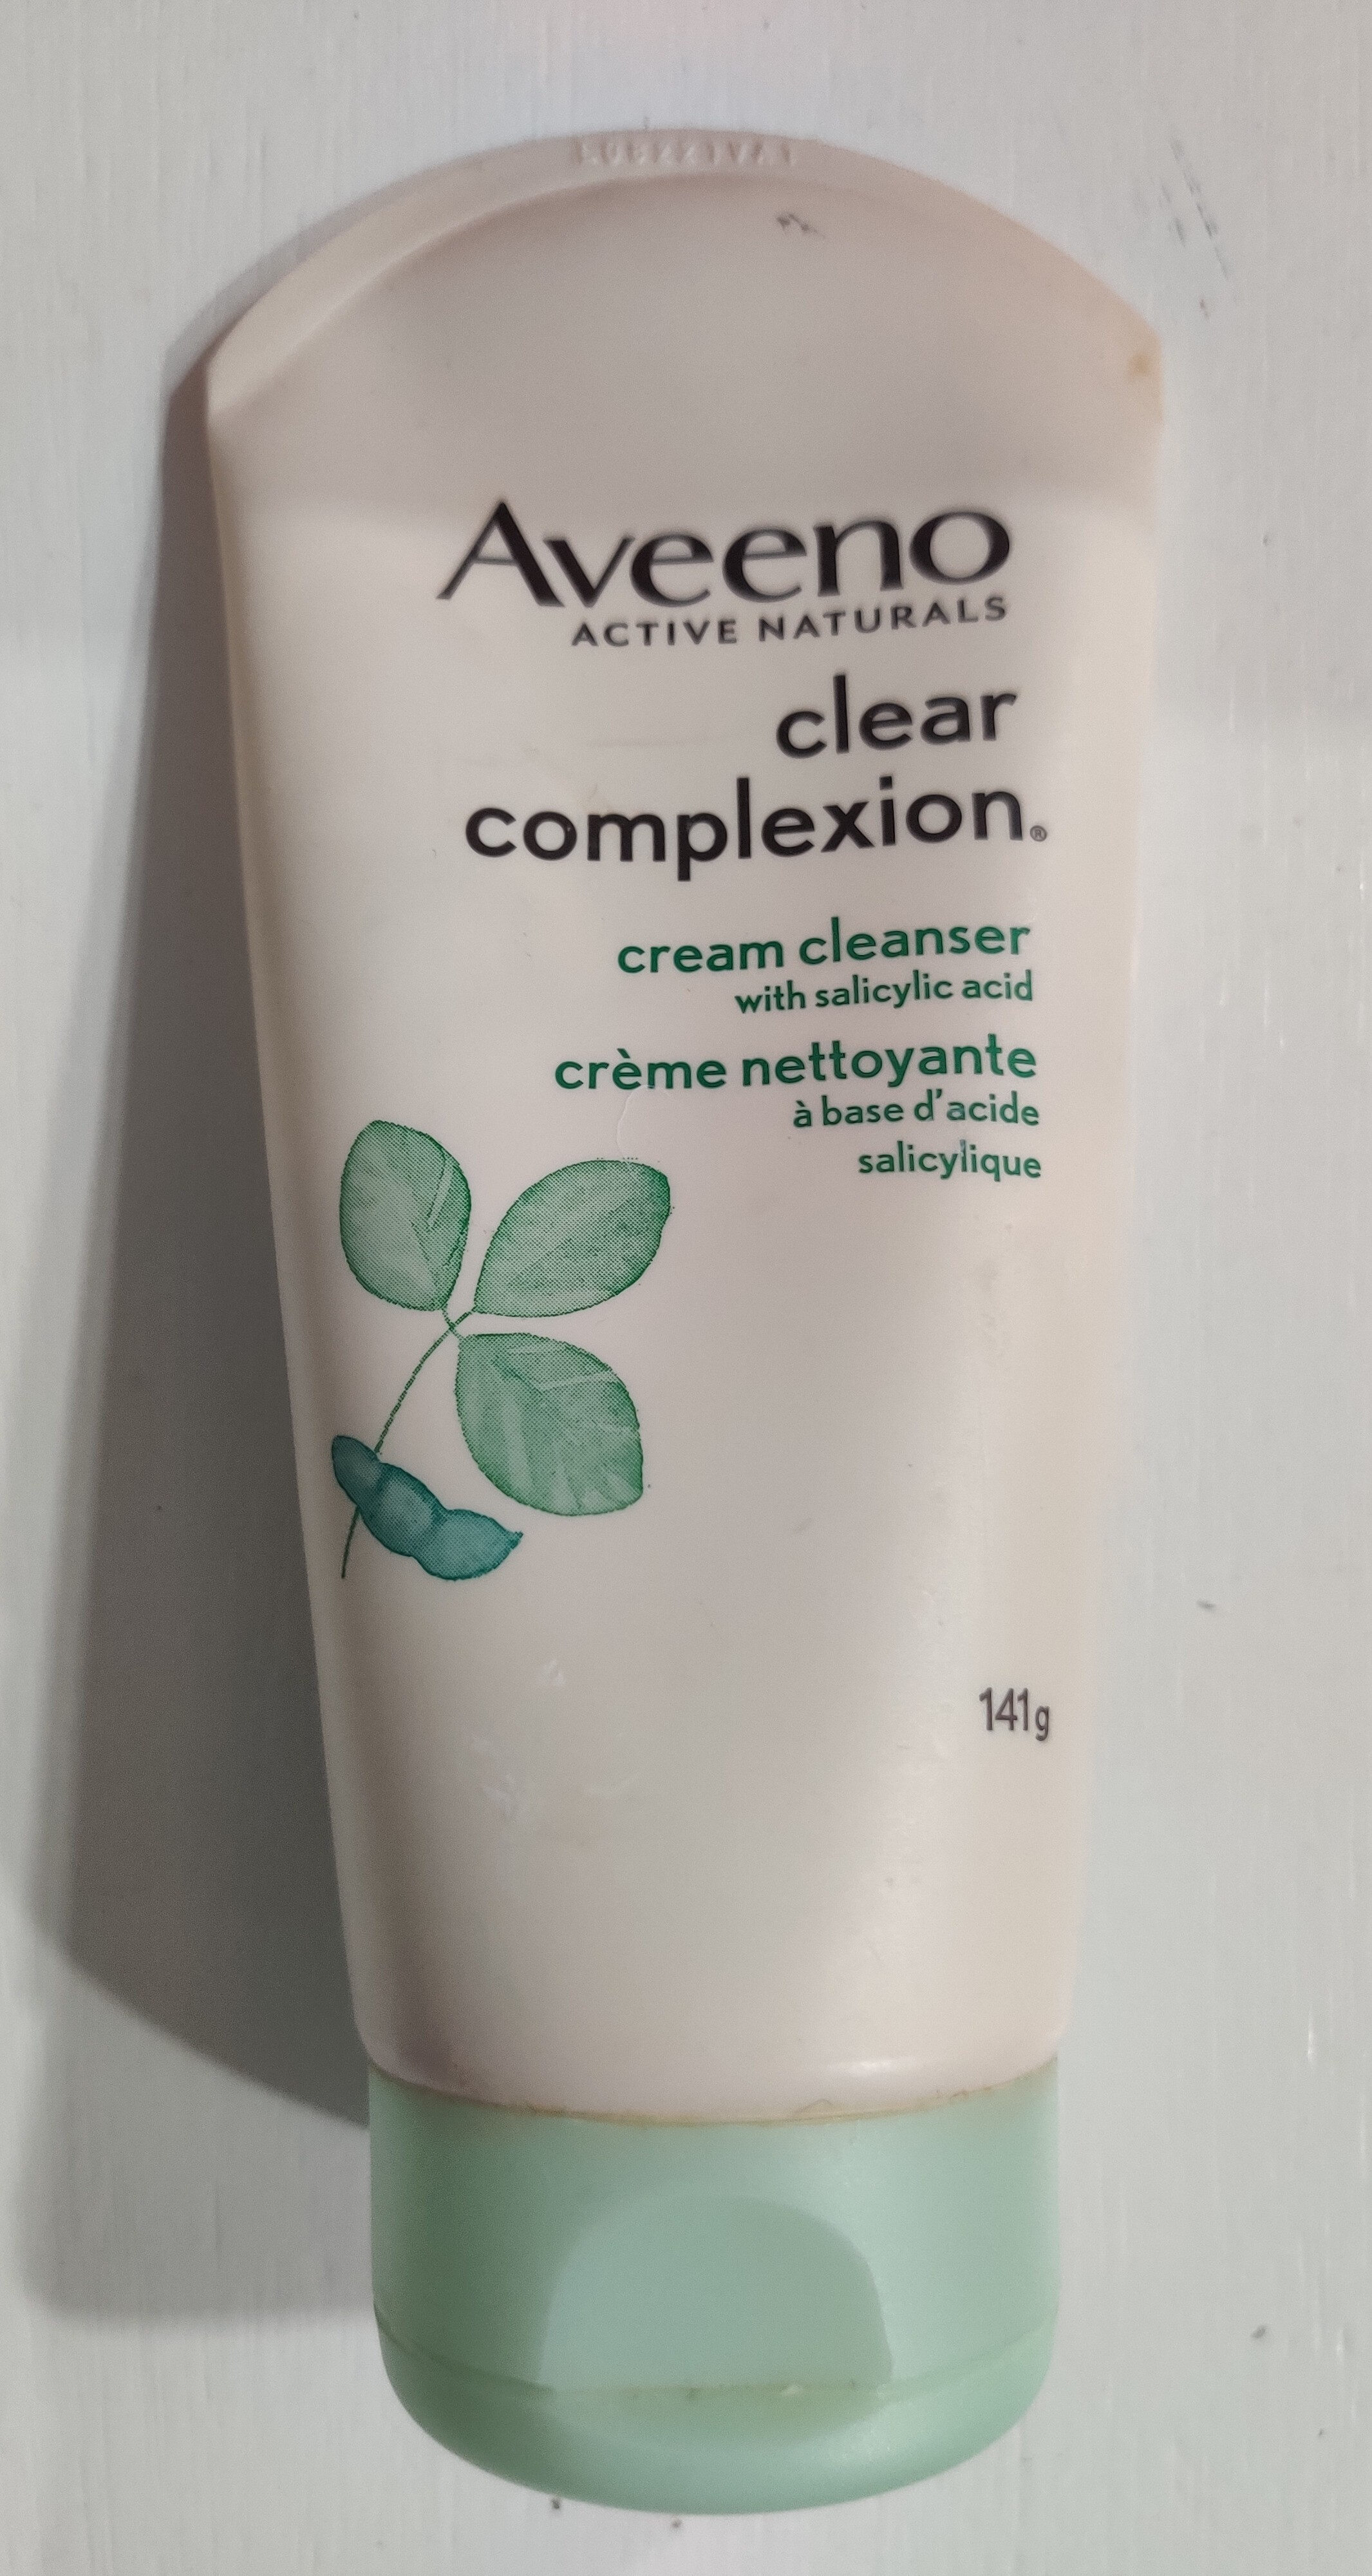 Aveeno clear completion cream cleanser - Product - en